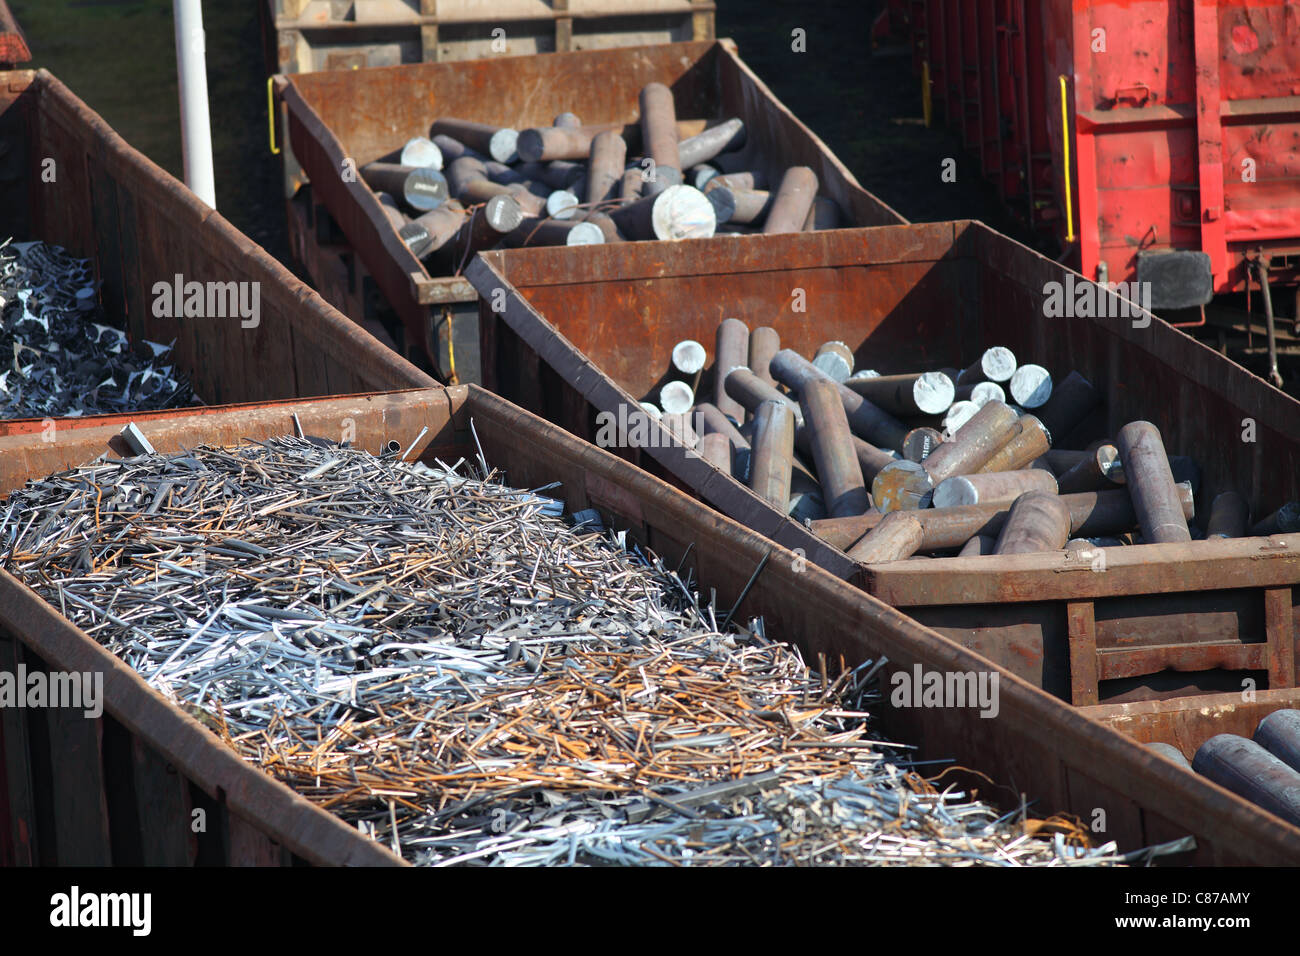 Freight depot, freight yard. Scrap metal in railway wagons, for melt down in a steelworks, recycling of old metal. Stock Photo